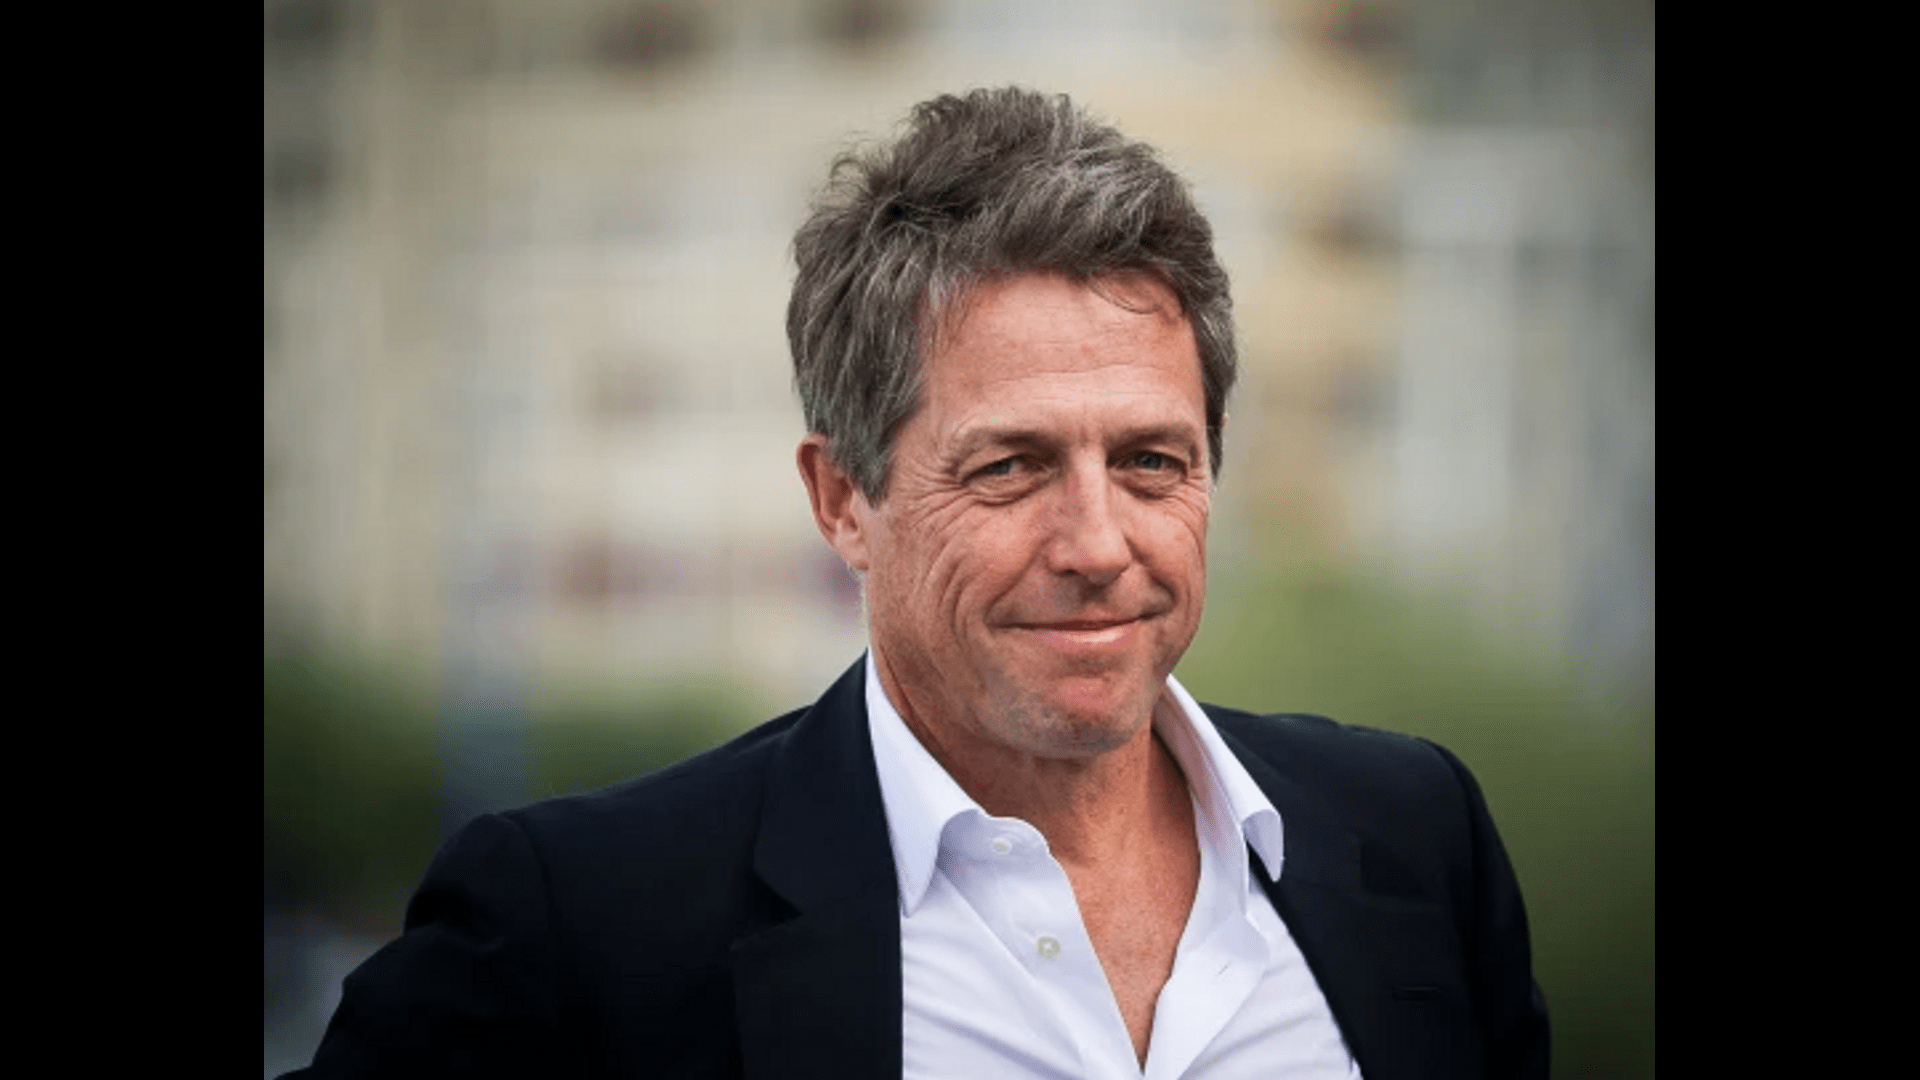 ”hugh-grant-accuses-journalists-of-hacking-his-phone”